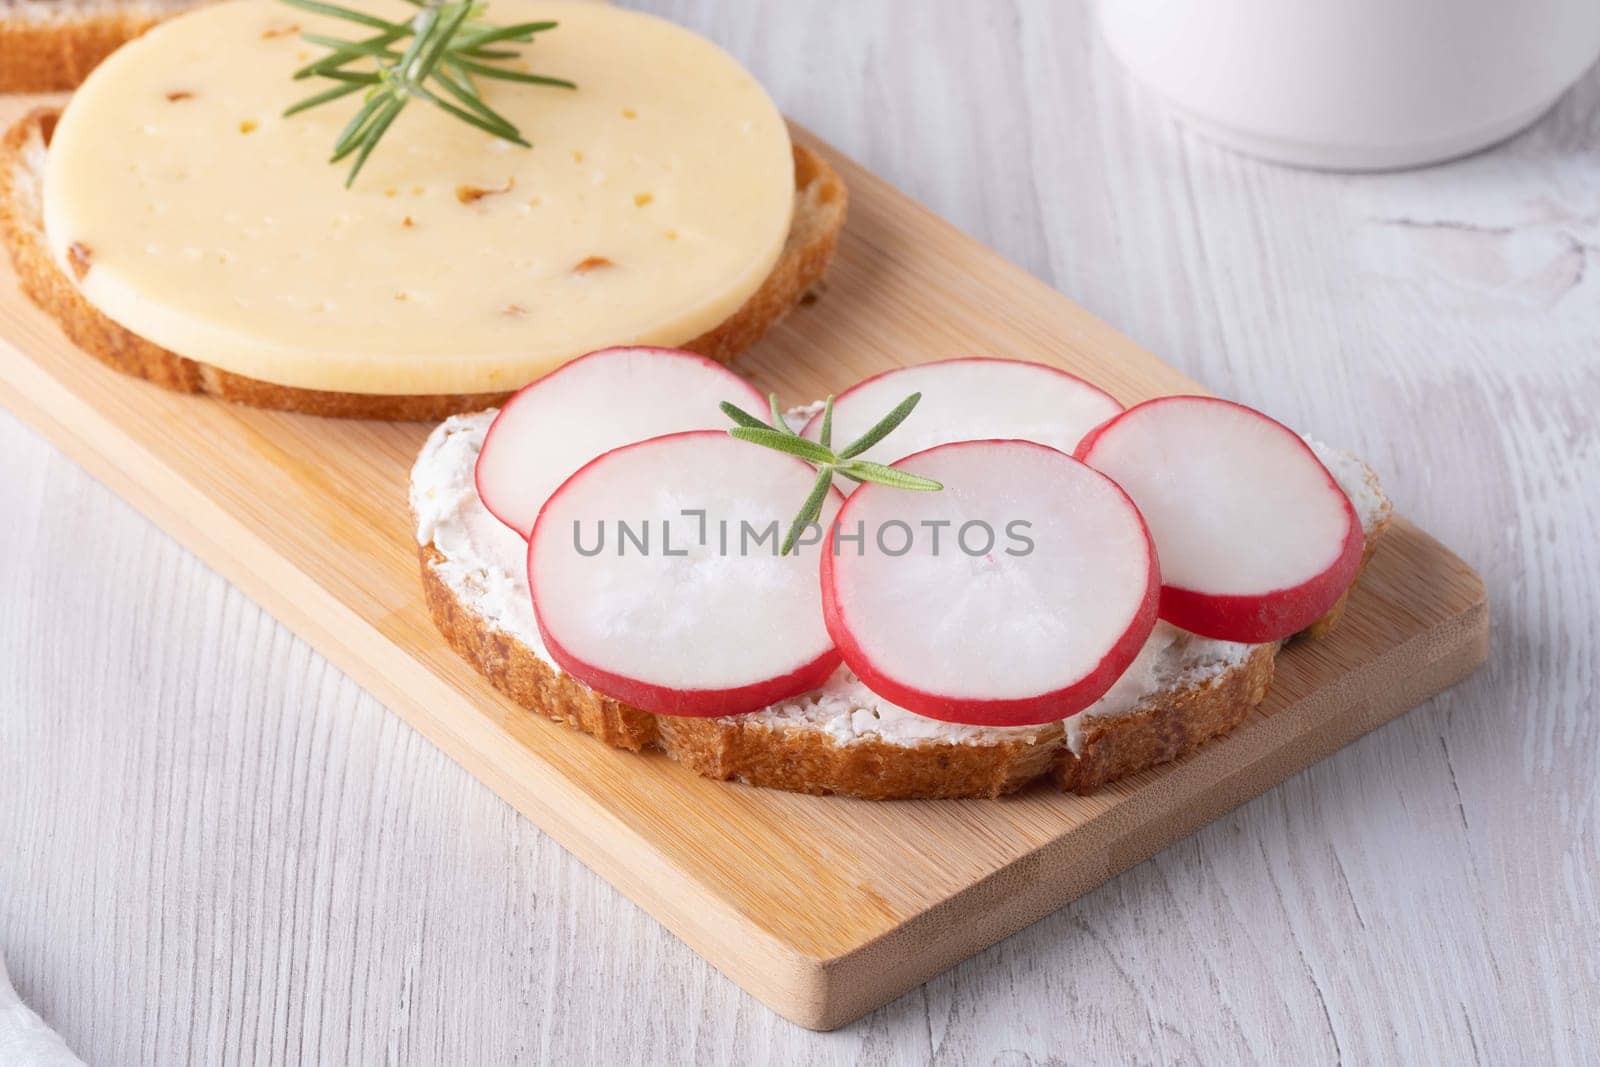 Sandwiches with radishes, cottage cheese and cheese.